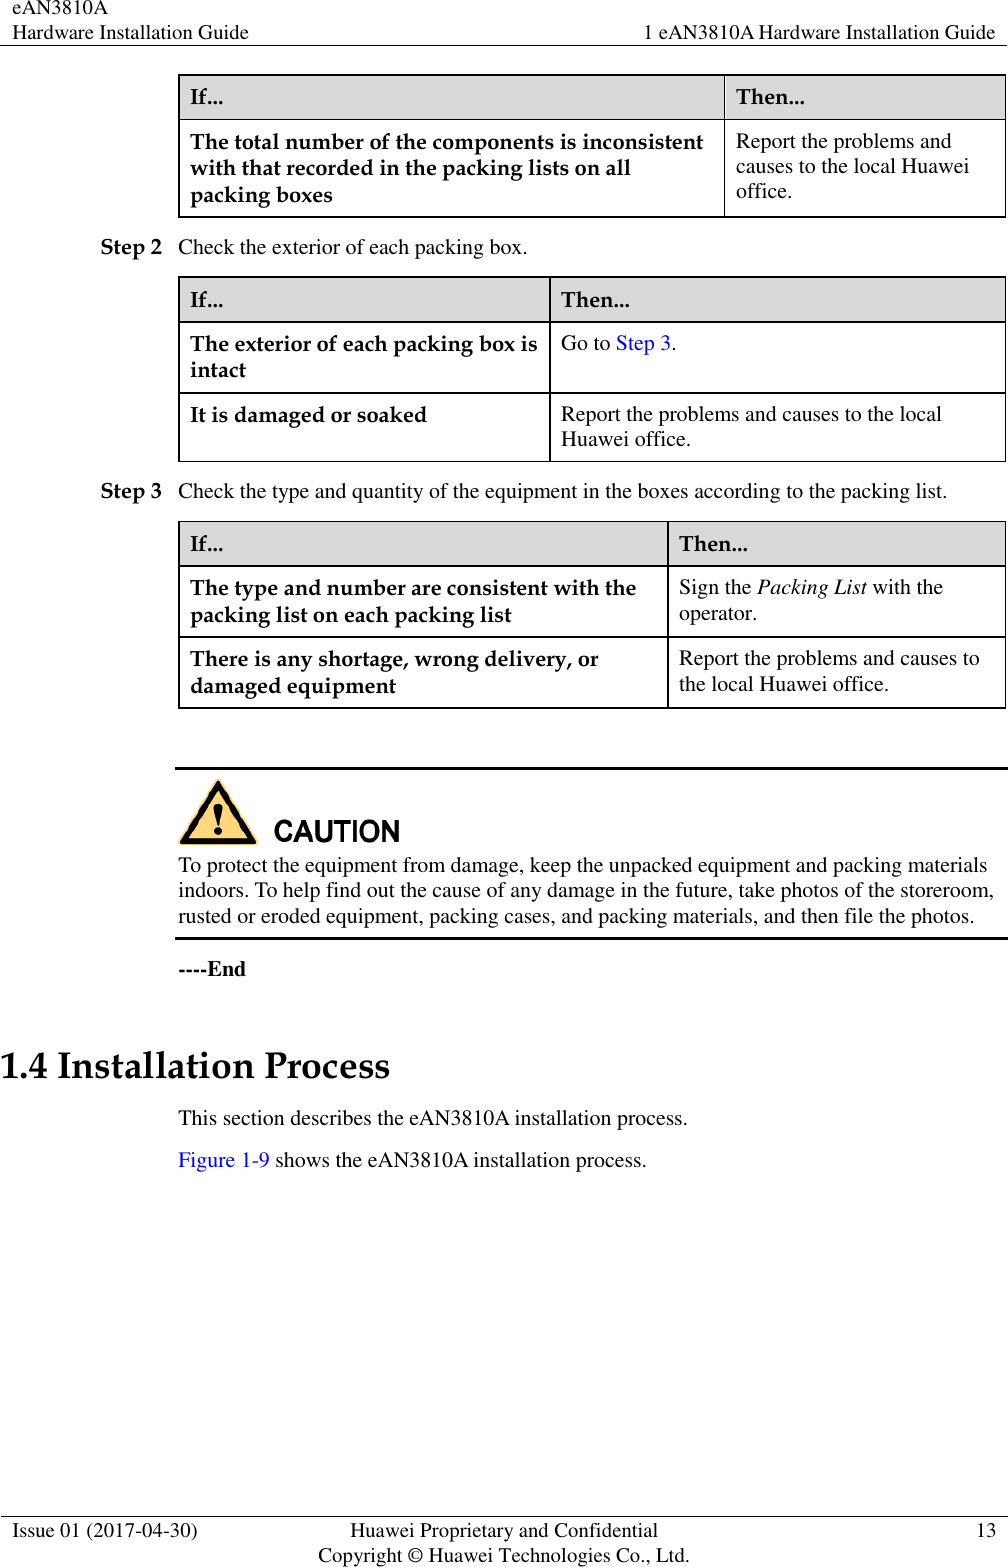 eAN3810A   Hardware Installation Guide 1 eAN3810A Hardware Installation Guide  Issue 01 (2017-04-30) Huawei Proprietary and Confidential                                     Copyright © Huawei Technologies Co., Ltd. 13  If... Then... The total number of the components is inconsistent with that recorded in the packing lists on all packing boxes Report the problems and causes to the local Huawei office. Step 2 Check the exterior of each packing box.   If... Then... The exterior of each packing box is intact Go to Step 3. It is damaged or soaked Report the problems and causes to the local Huawei office. Step 3 Check the type and quantity of the equipment in the boxes according to the packing list. If... Then... The type and number are consistent with the packing list on each packing list Sign the Packing List with the operator.   There is any shortage, wrong delivery, or damaged equipment Report the problems and causes to the local Huawei office.   To protect the equipment from damage, keep the unpacked equipment and packing materials indoors. To help find out the cause of any damage in the future, take photos of the storeroom, rusted or eroded equipment, packing cases, and packing materials, and then file the photos.   ----End 1.4 Installation Process This section describes the eAN3810A installation process.   Figure 1-9 shows the eAN3810A installation process. 